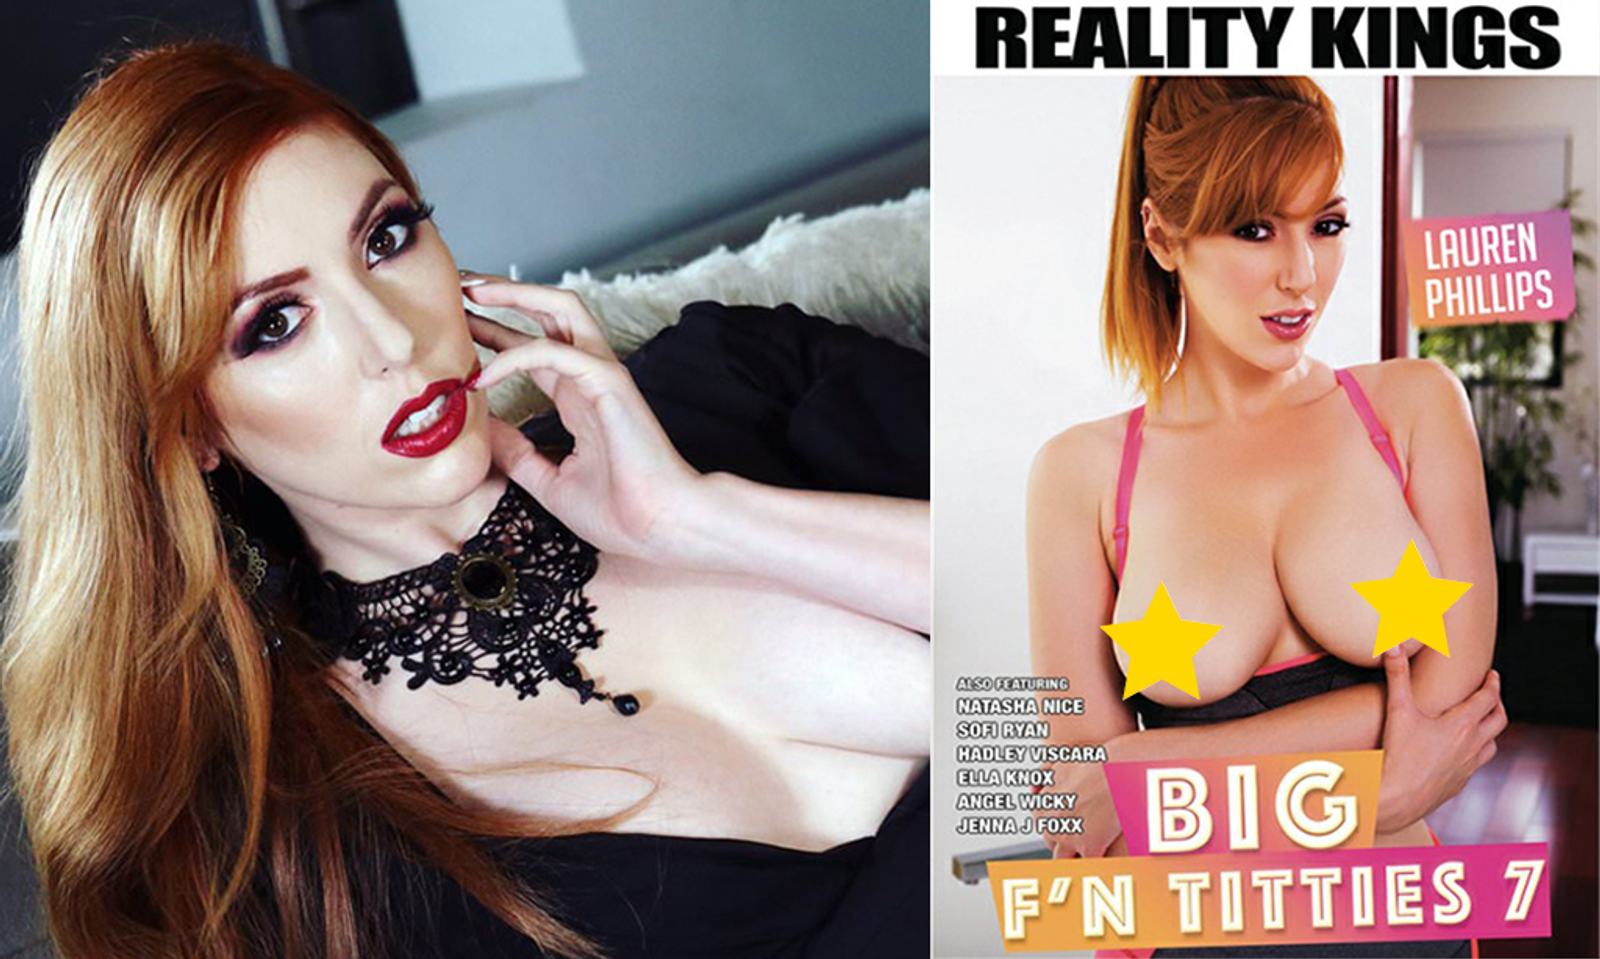 Lauren Phillips Goes All Tits Out on New Reality Kings Cover